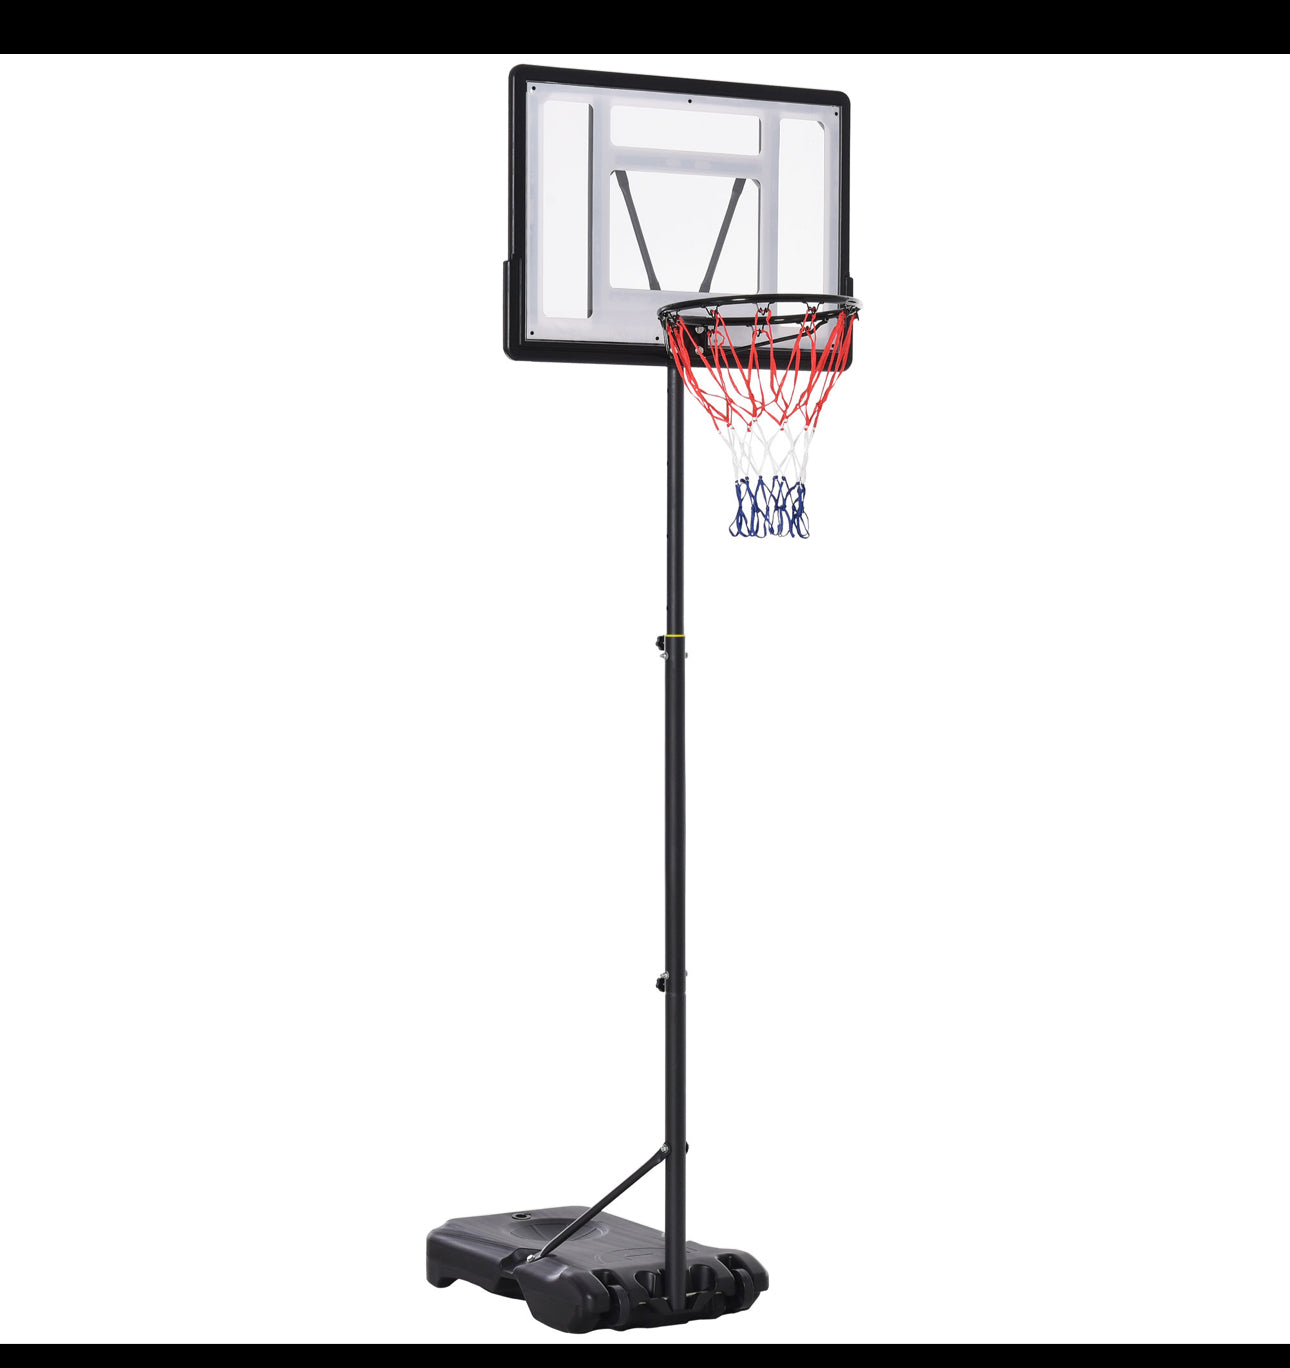 Adjustable 5-6.5 Feet Heavy Duty Basketball Hoop Net With Stand / Wheels For Kids | Age Group 3-12 Approx